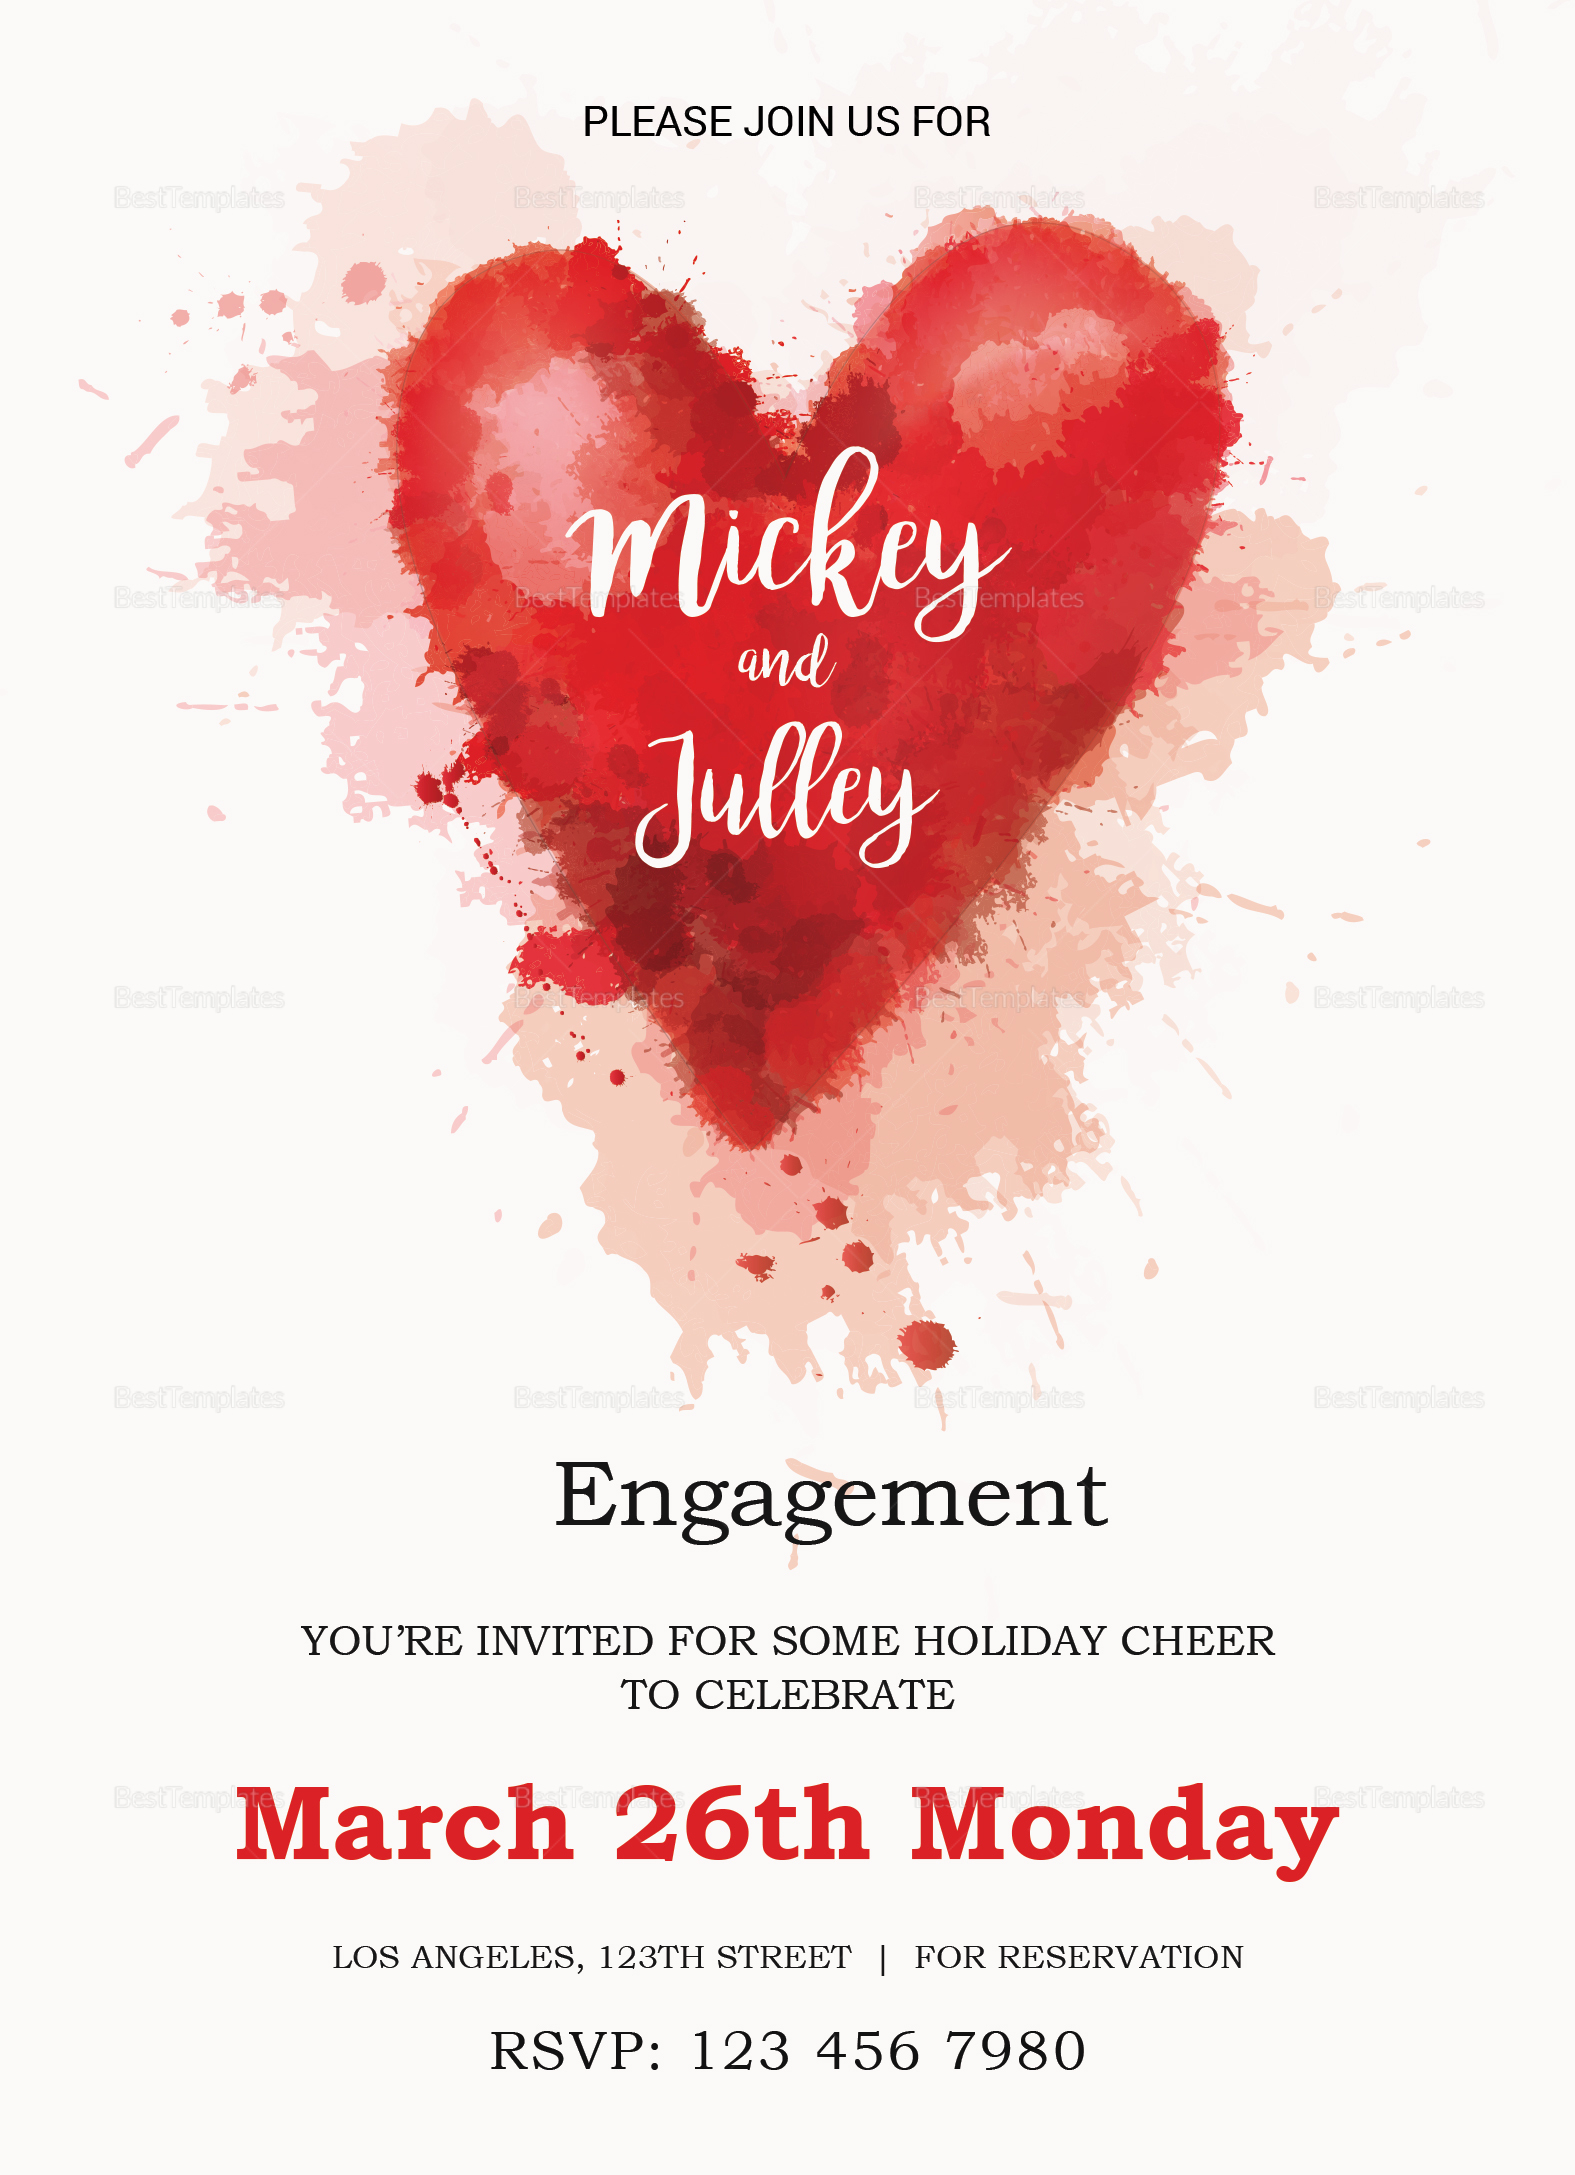 Colorful Engagement Invitation Card Template Throughout Engagement Invitation Card Template